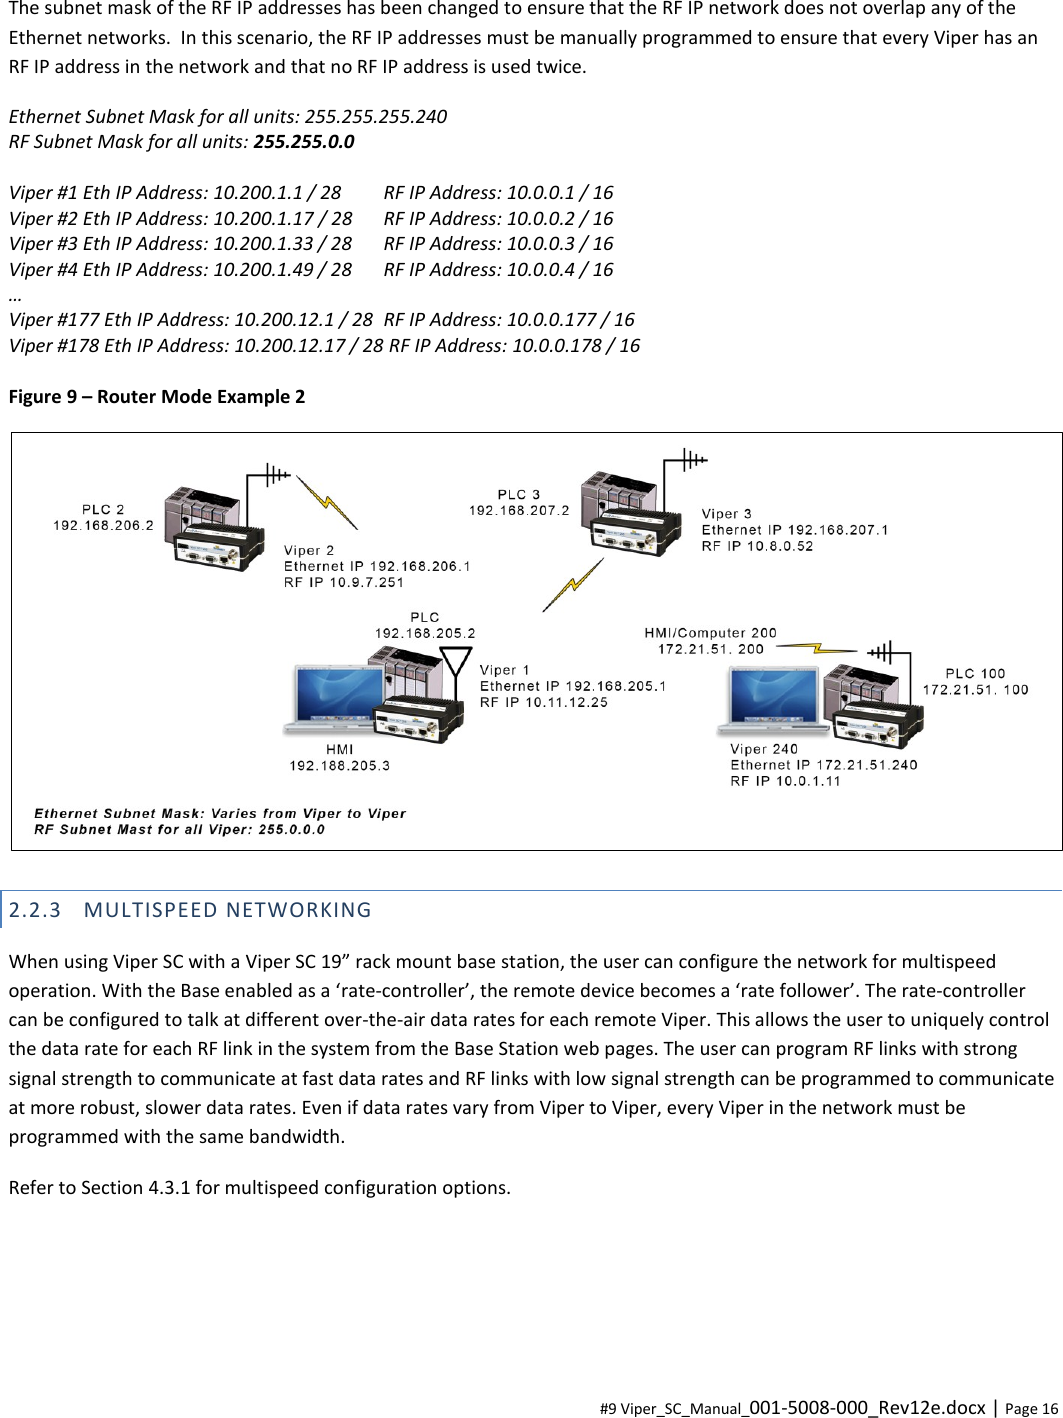  #9 Viper_SC_Manual_001-5008-000_Rev12e.docx | Page 16 The subnet mask of the RF IP addresses has been changed to ensure that the RF IP network does not overlap any of the Ethernet networks.  In this scenario, the RF IP addresses must be manually programmed to ensure that every Viper has an RF IP address in the network and that no RF IP address is used twice. Ethernet Subnet Mask for all units: 255.255.255.240 RF Subnet Mask for all units: 255.255.0.0  Viper #1 Eth IP Address: 10.200.1.1 / 28  RF IP Address: 10.0.0.1 / 16 Viper #2 Eth IP Address: 10.200.1.17 / 28  RF IP Address: 10.0.0.2 / 16 Viper #3 Eth IP Address: 10.200.1.33 / 28  RF IP Address: 10.0.0.3 / 16 Viper #4 Eth IP Address: 10.200.1.49 / 28  RF IP Address: 10.0.0.4 / 16 … Viper #177 Eth IP Address: 10.200.12.1 / 28  RF IP Address: 10.0.0.177 / 16 Viper #178 Eth IP Address: 10.200.12.17 / 28 RF IP Address: 10.0.0.178 / 16  Figure 9 – Router Mode Example 2  2.2.3 MULTISPEED NETWORKING When using Viper SC with a Viper SC 19” rack mount base station, the user can configure the network for multispeed operation. With the Base enabled as a ‘rate-controller’, the remote device becomes a ‘rate follower’. The rate-controller can be configured to talk at different over-the-air data rates for each remote Viper. This allows the user to uniquely control the data rate for each RF link in the system from the Base Station web pages. The user can program RF links with strong signal strength to communicate at fast data rates and RF links with low signal strength can be programmed to communicate at more robust, slower data rates. Even if data rates vary from Viper to Viper, every Viper in the network must be programmed with the same bandwidth.  Refer to Section 4.3.1 for multispeed configuration options.     